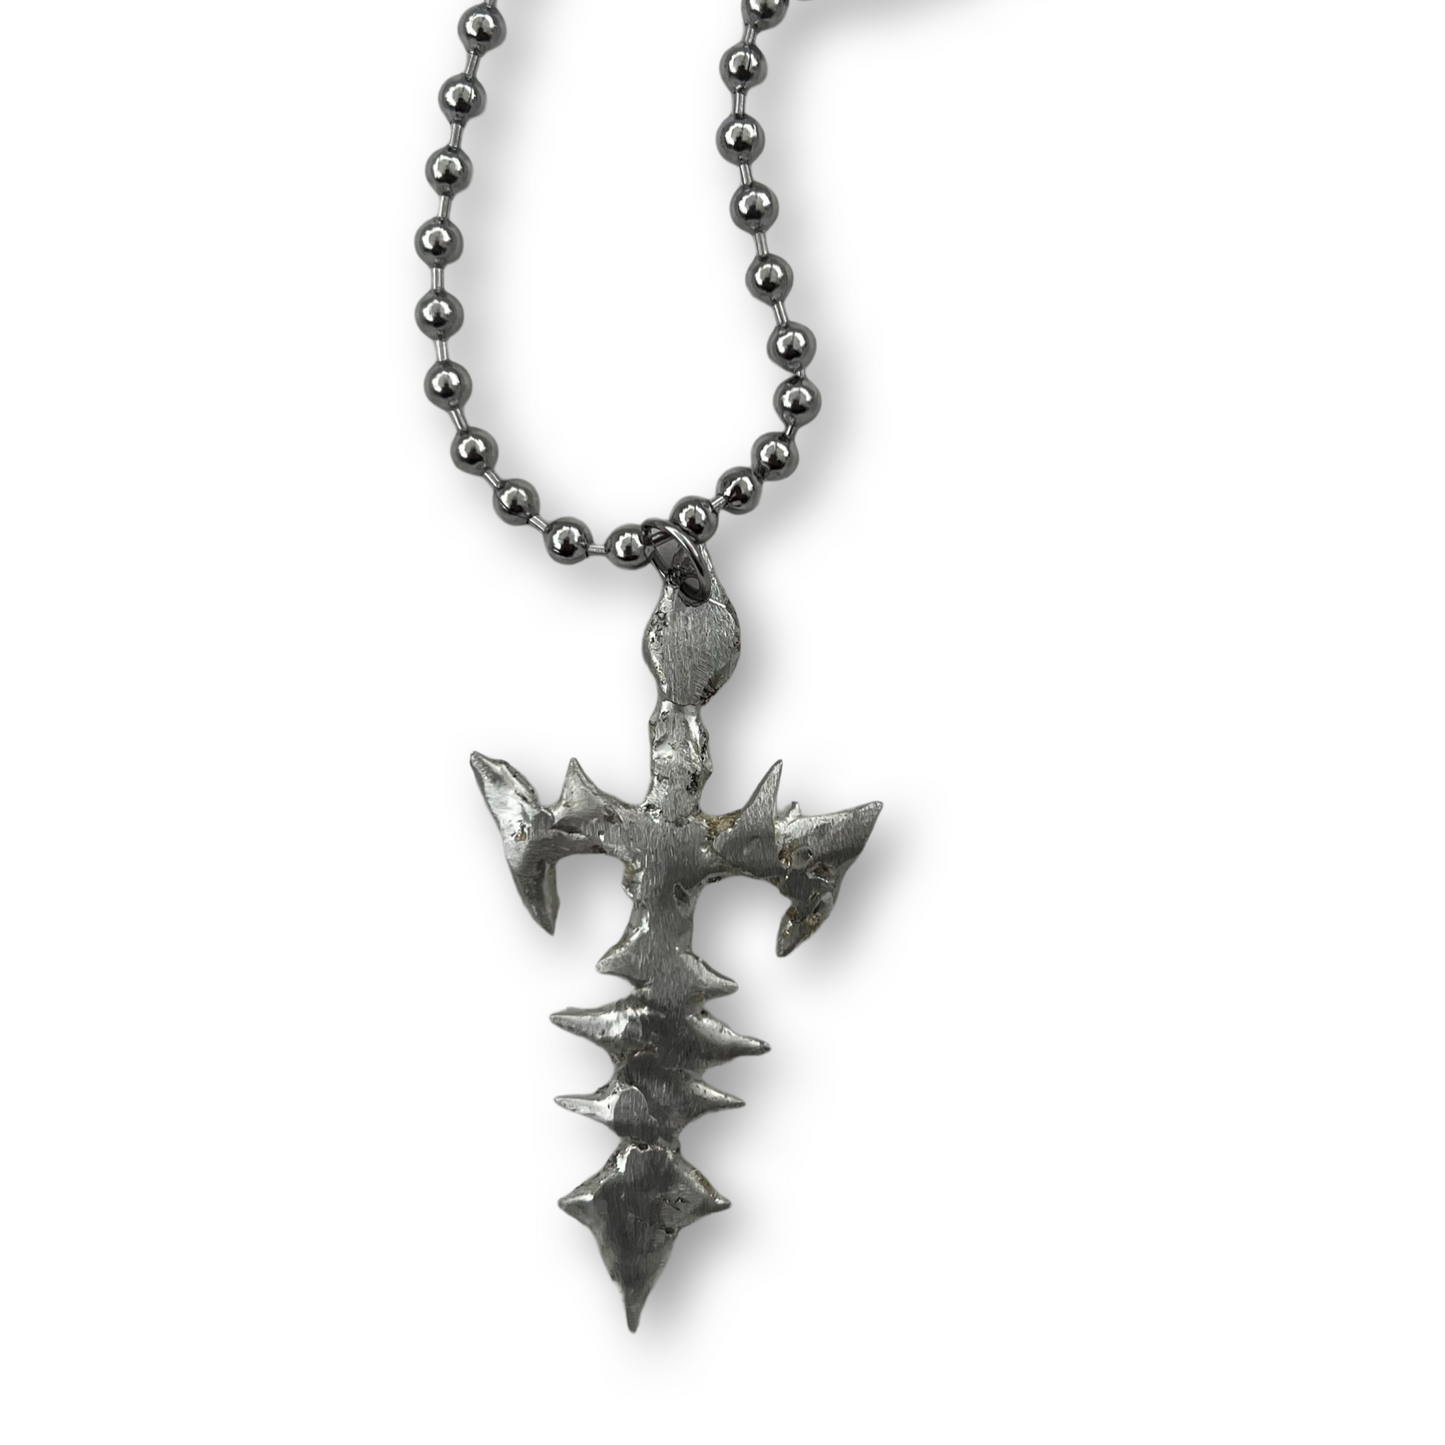 The Sword Pendent!